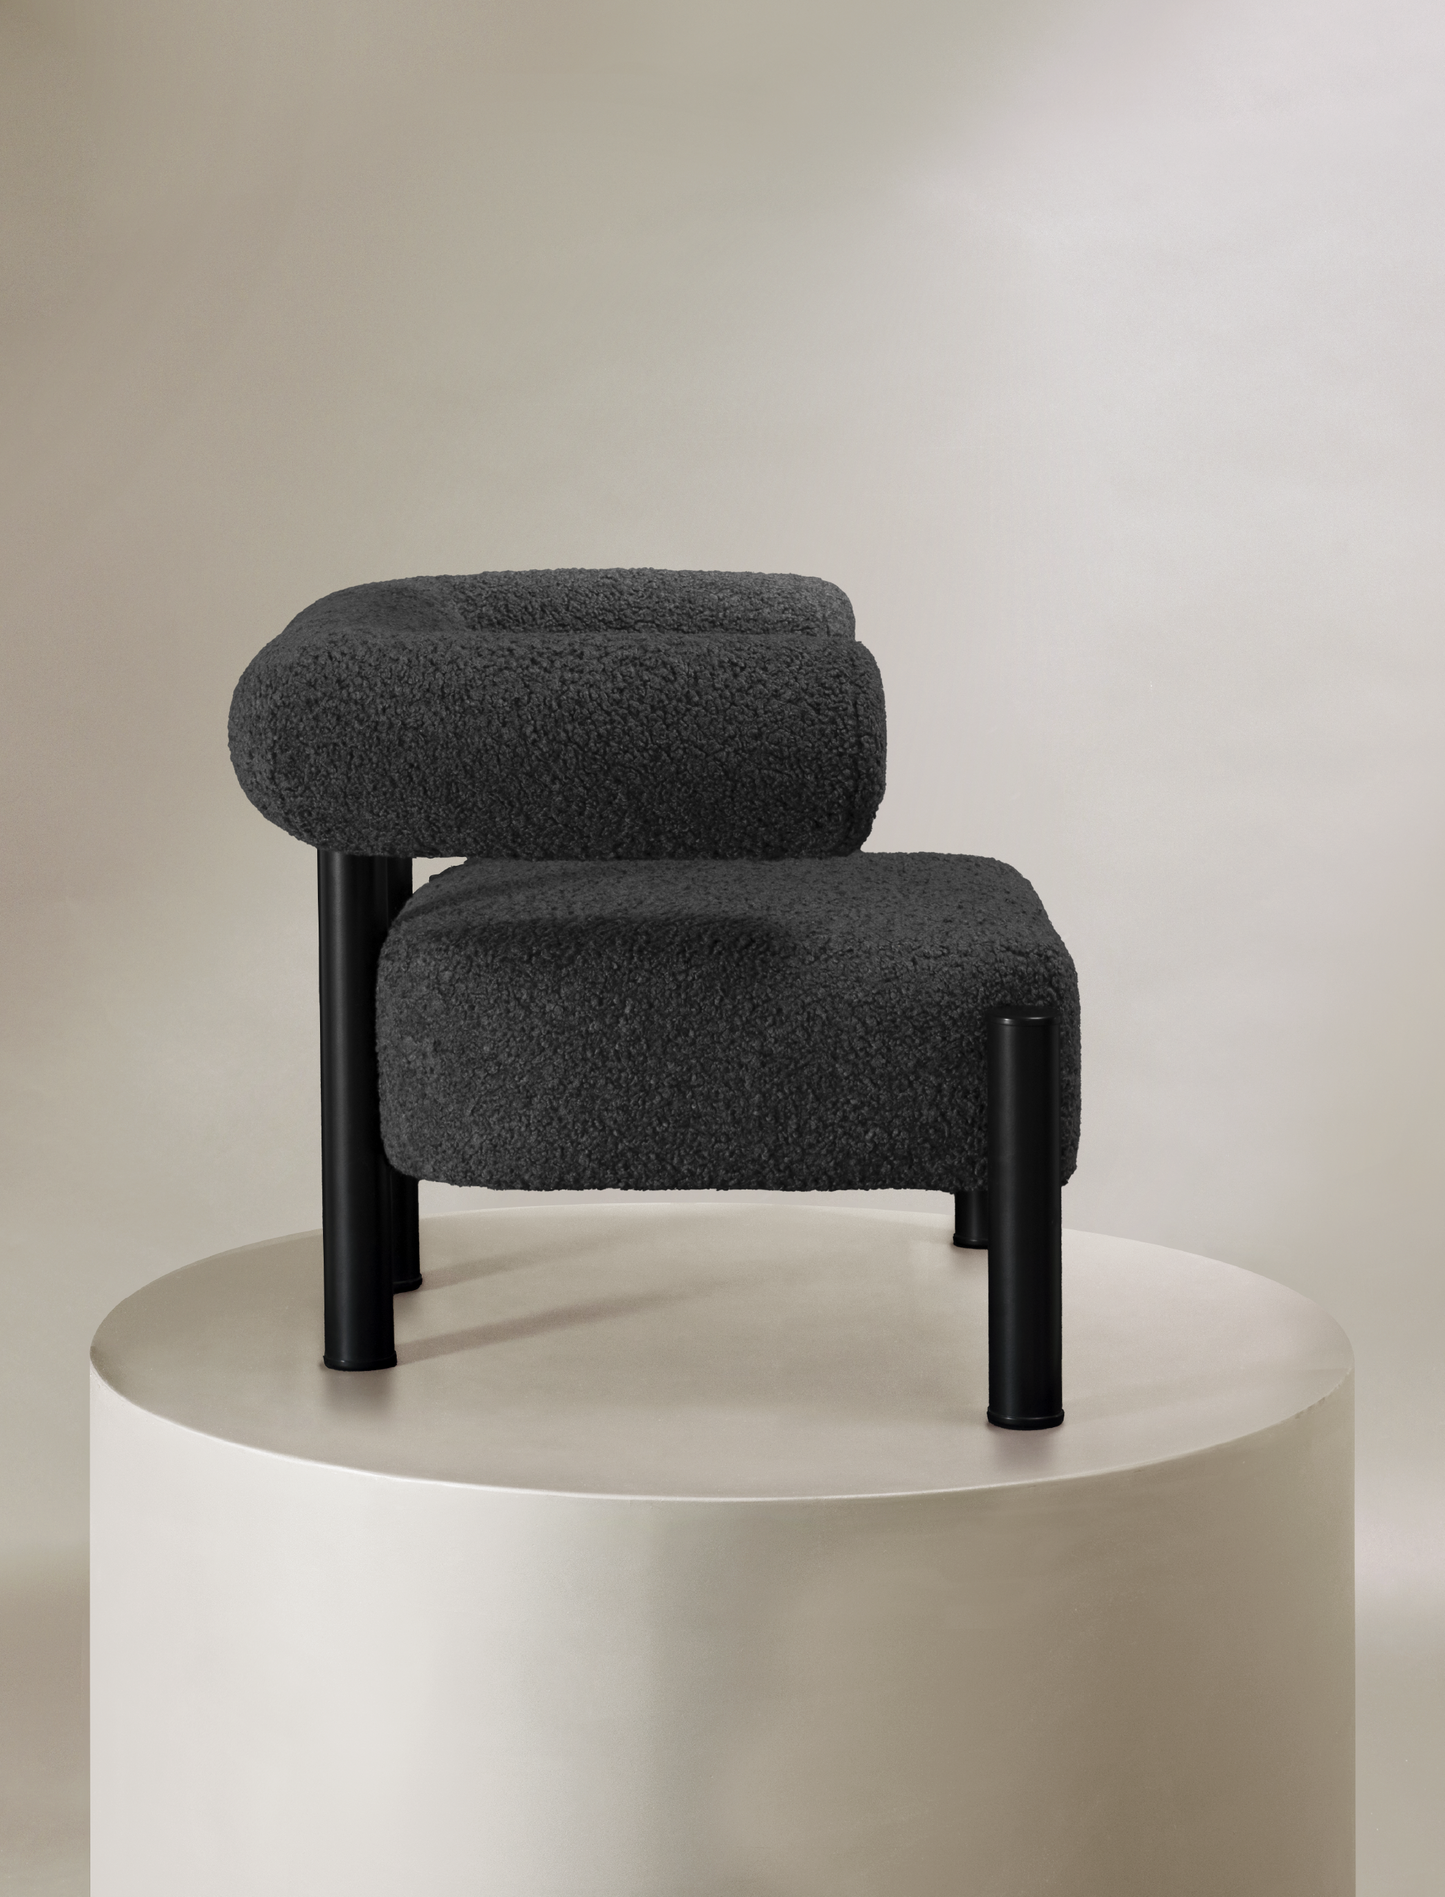 The CASEY occasional chair in grey